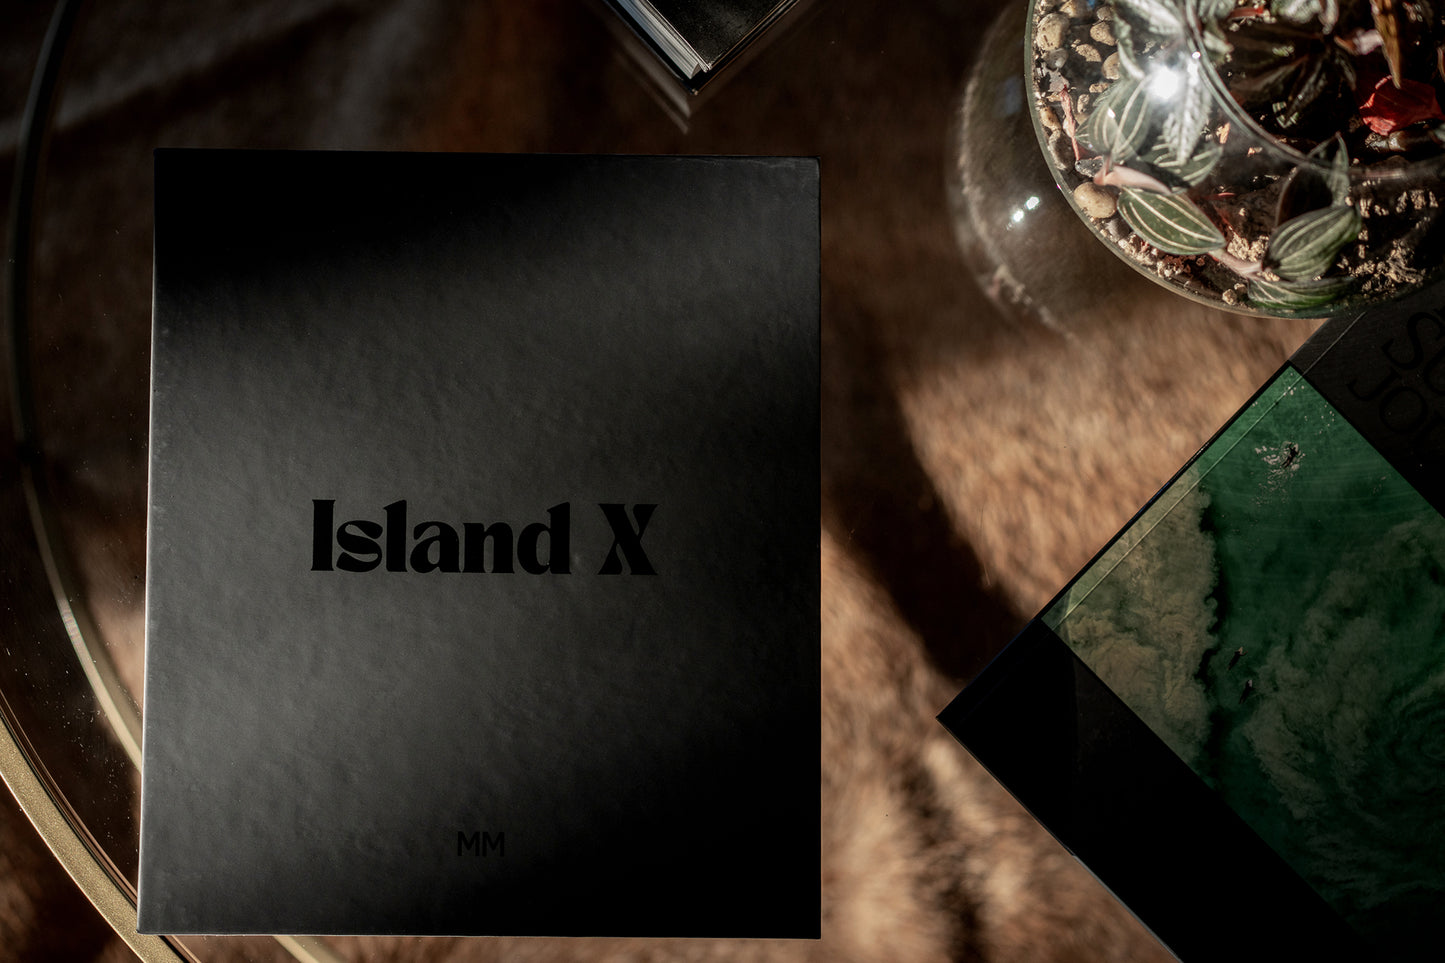 Island X- A photography book by Mark McInnis- Limited edition black slip case.